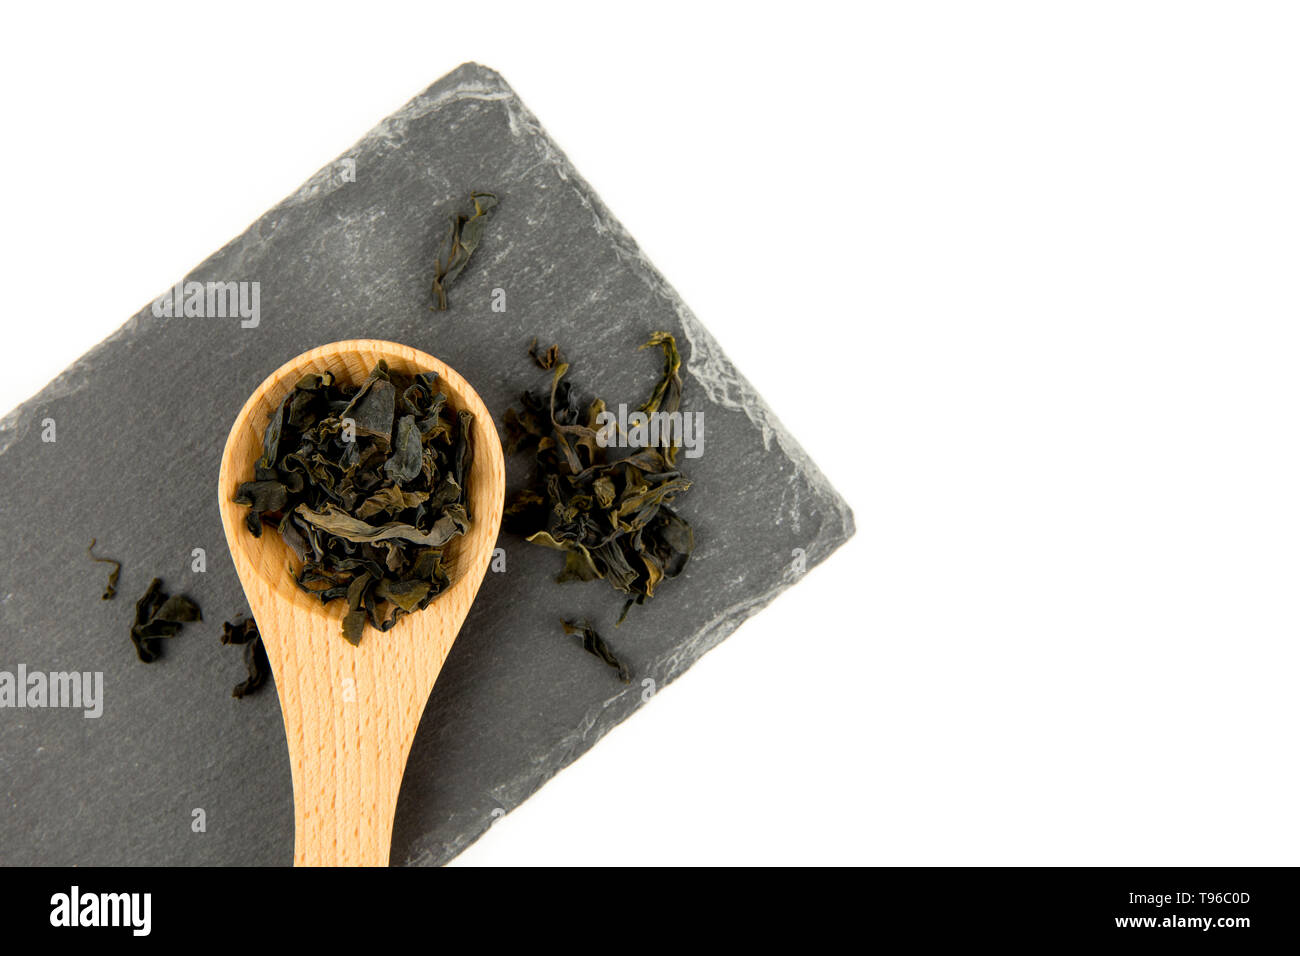 Small pieces of dried Wakame (Undaria pinnatifida), edible seaweed, ingredient to different foods in wooden spoon on black stone cutting board isolate Stock Photo